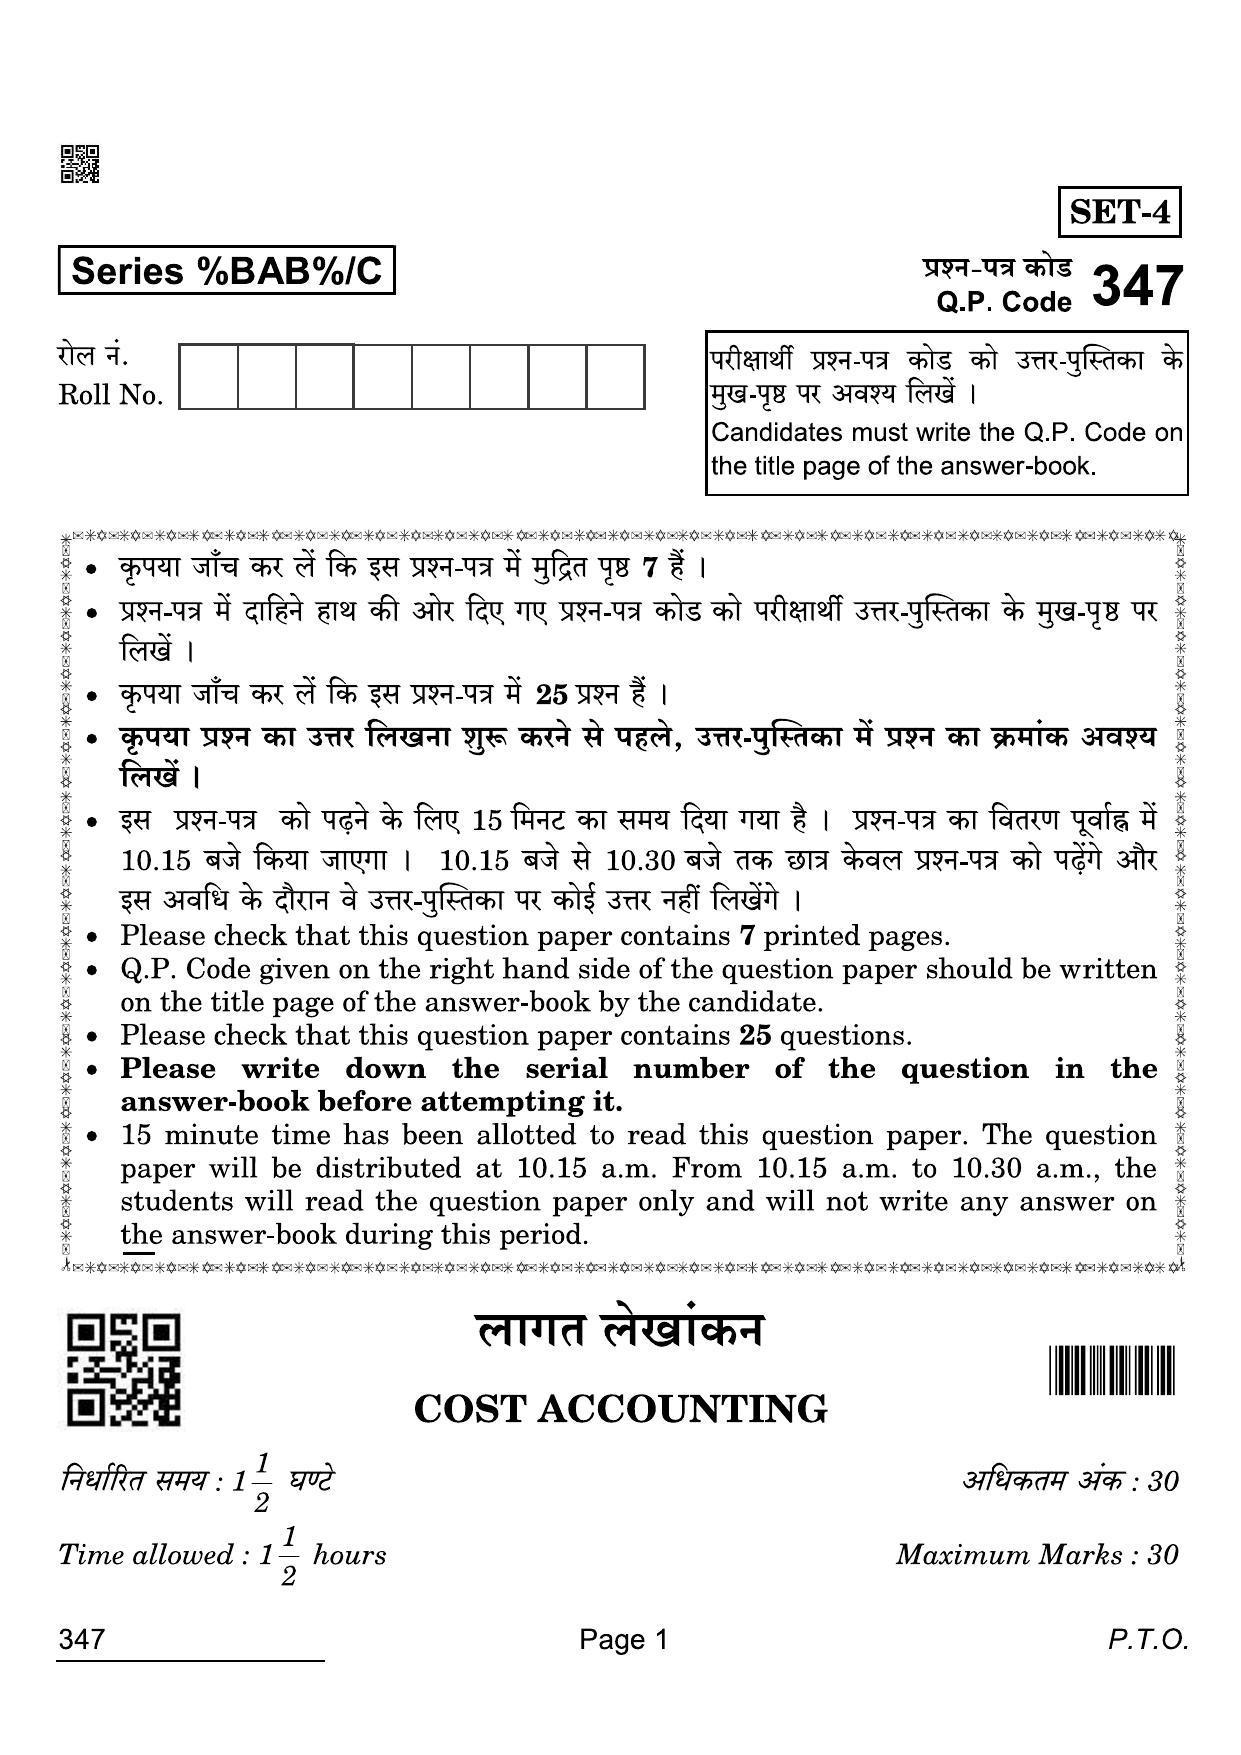 CBSE Class 12 347 Cost Accounting 2022 Compartment Question Paper - Page 1